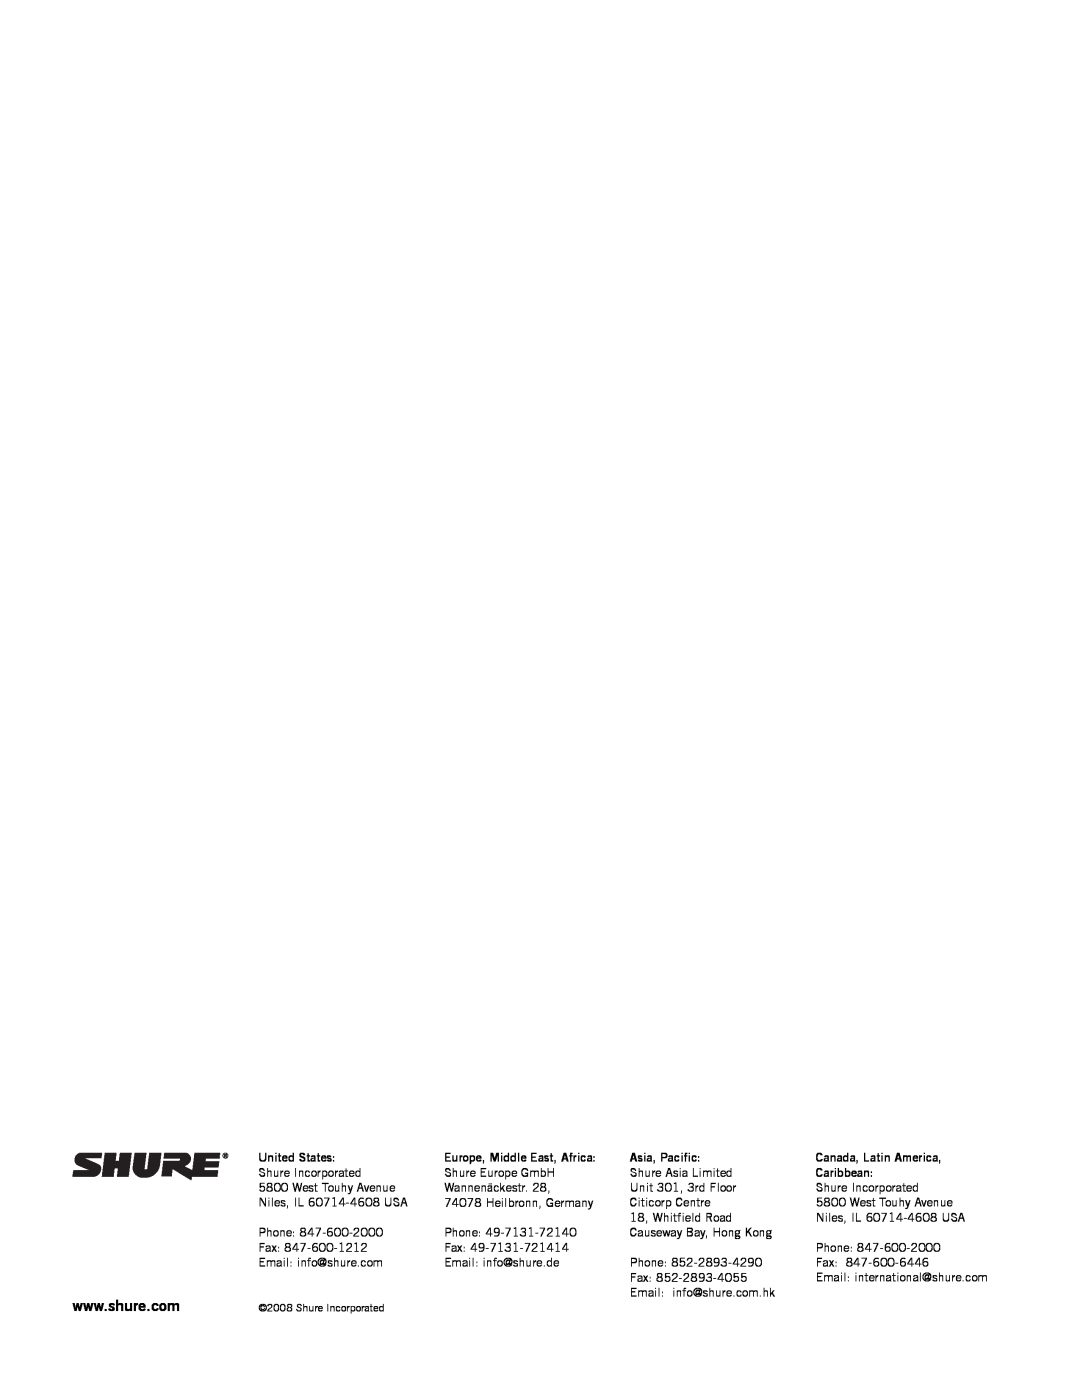 Shure PA421SWB manual United States, Europe, Middle East, Africa, Asia, Pacific, Canada, Latin America, Caribbean 